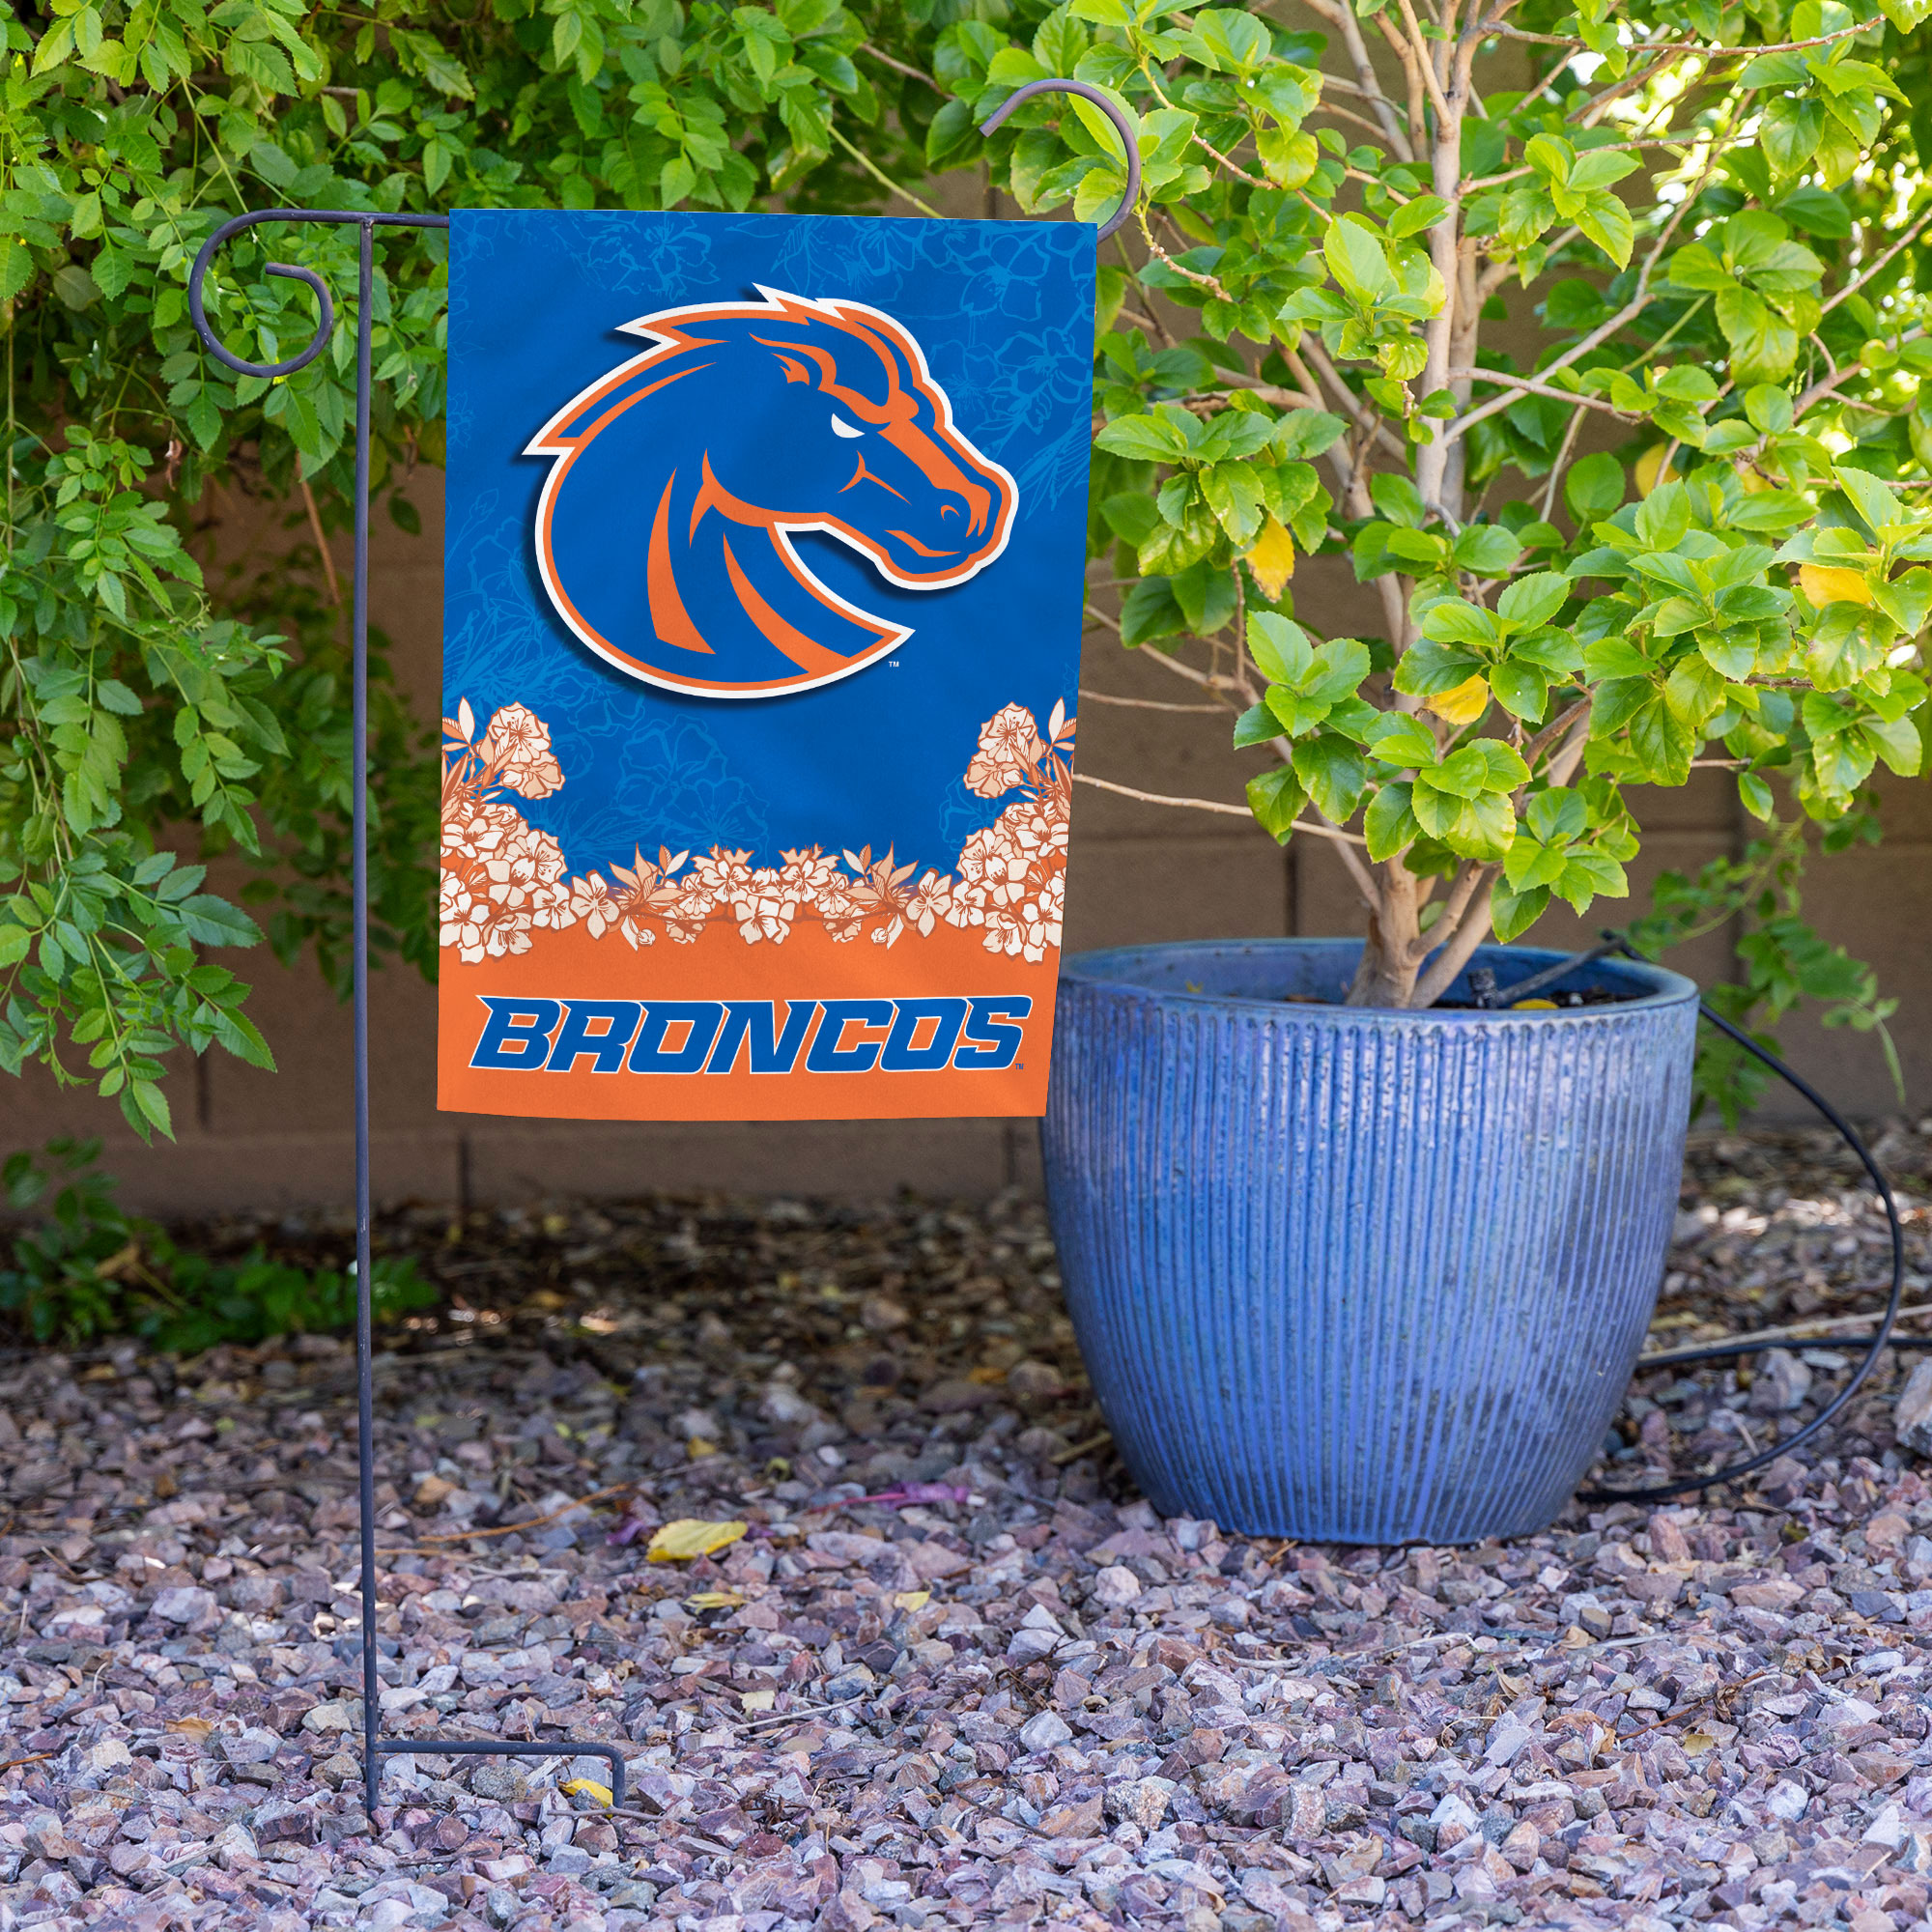 Rico Industries NCAA  Boise State Broncos Primary Double Sided Garden Flag